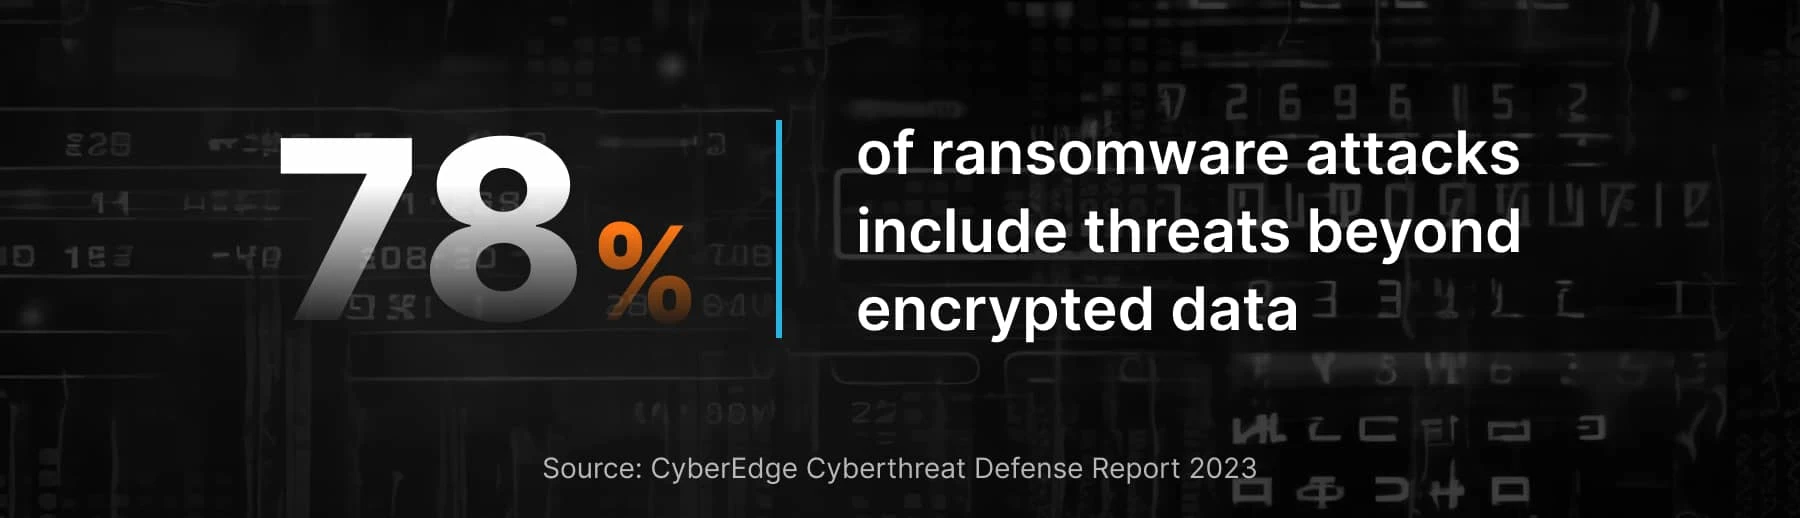 78% of ransomware attacks include threats beyond encrypted data